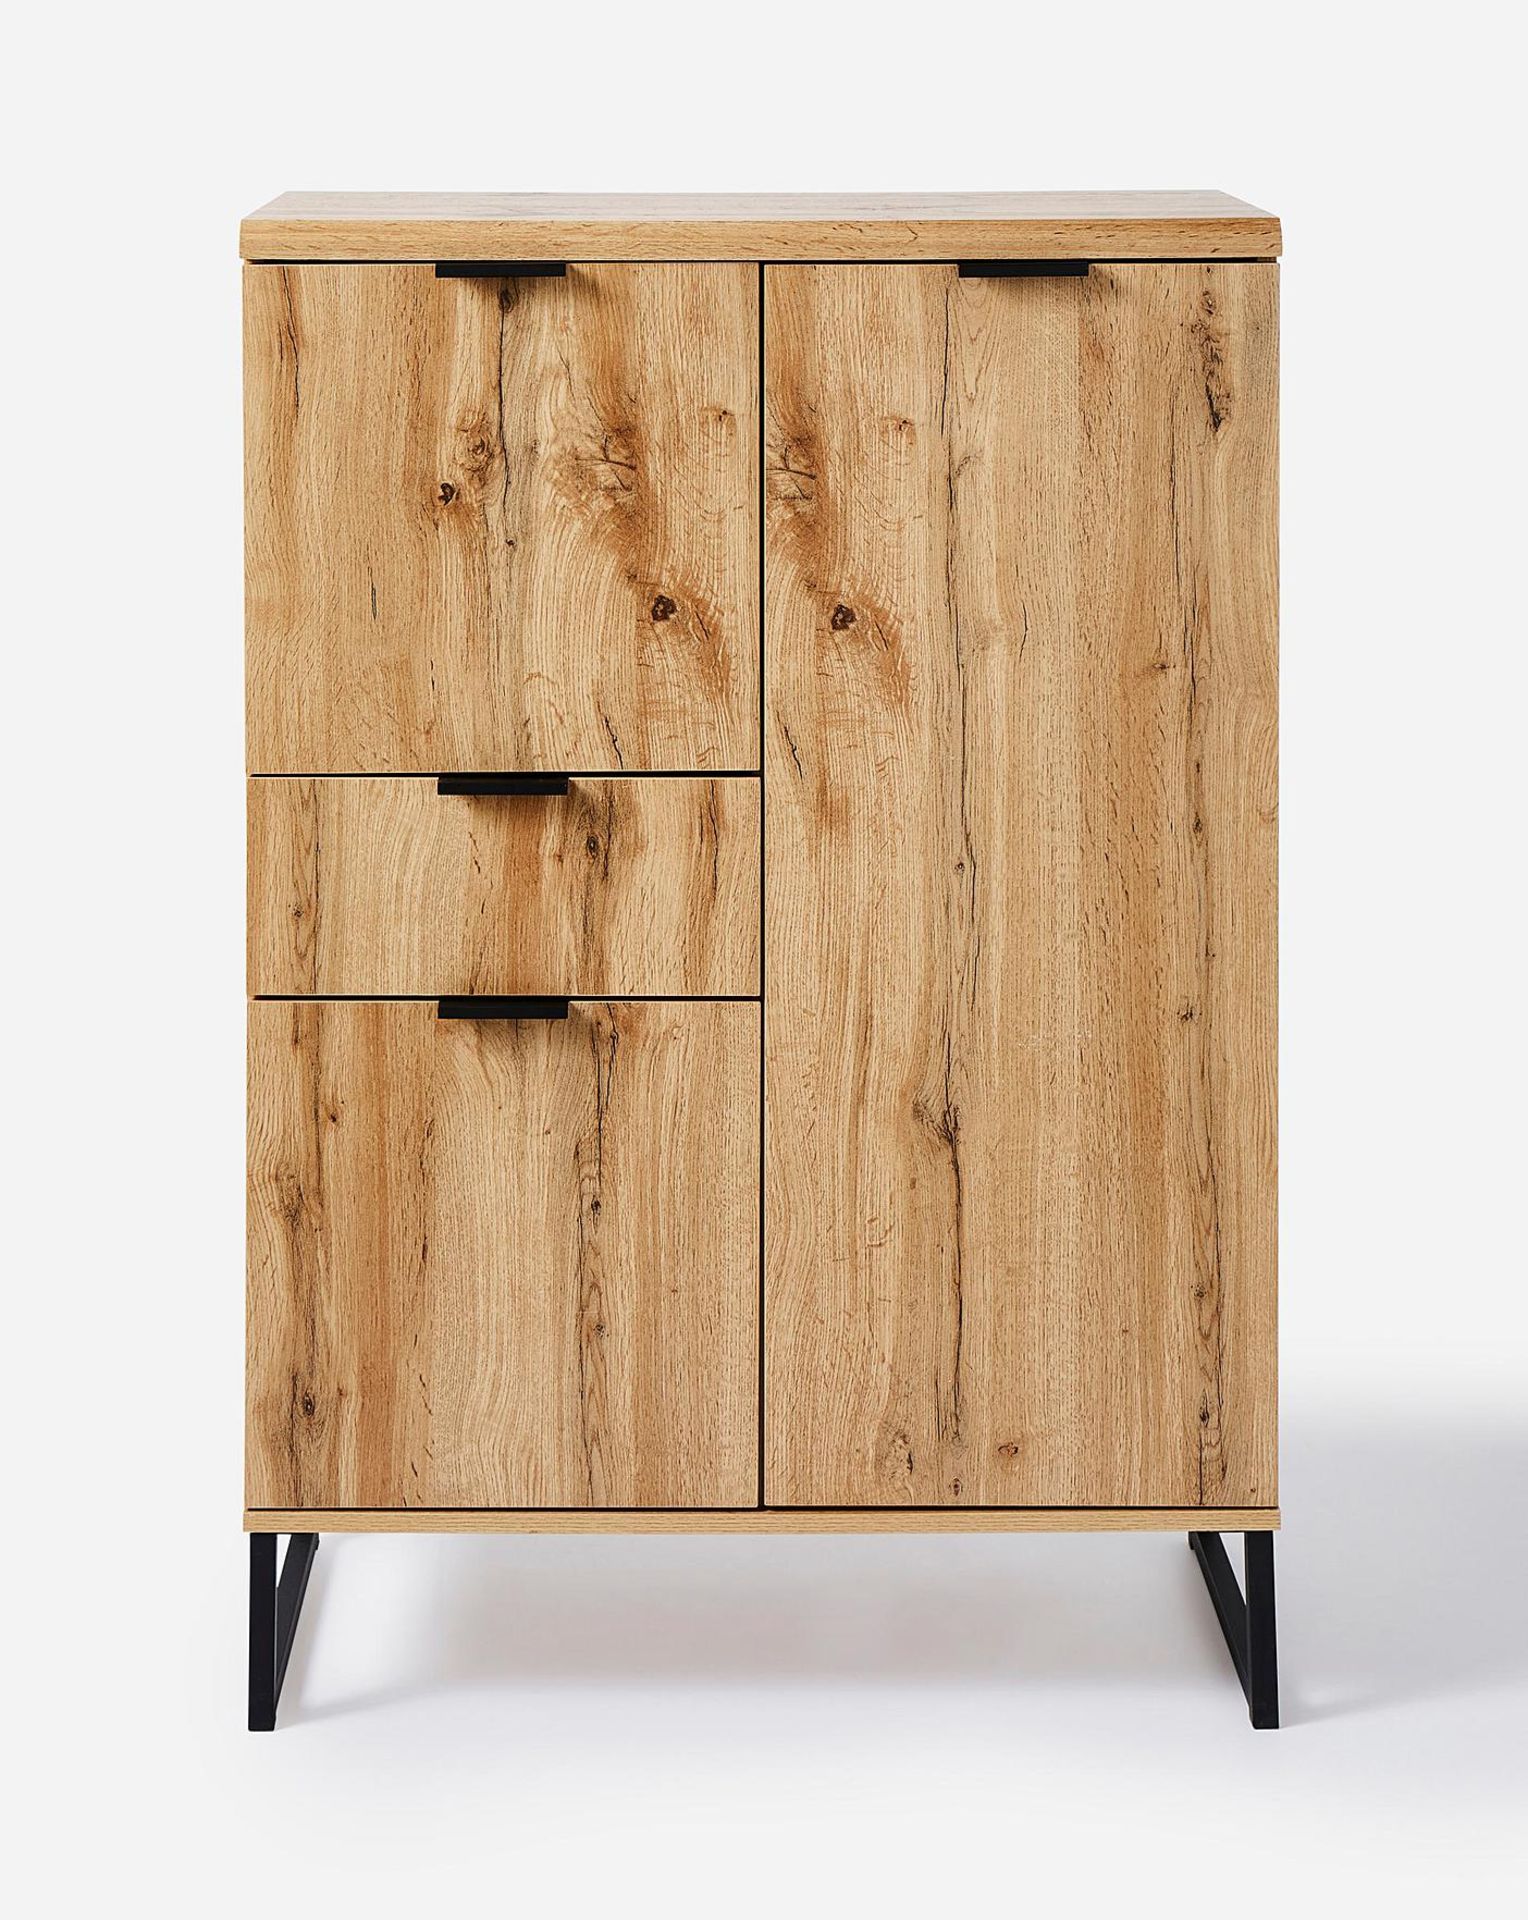 BRAND NEW SHOREDITCH Drinks Cabinet. OAK. RRP £299. The Shoreditch Range is a contemporary and - Image 5 of 8